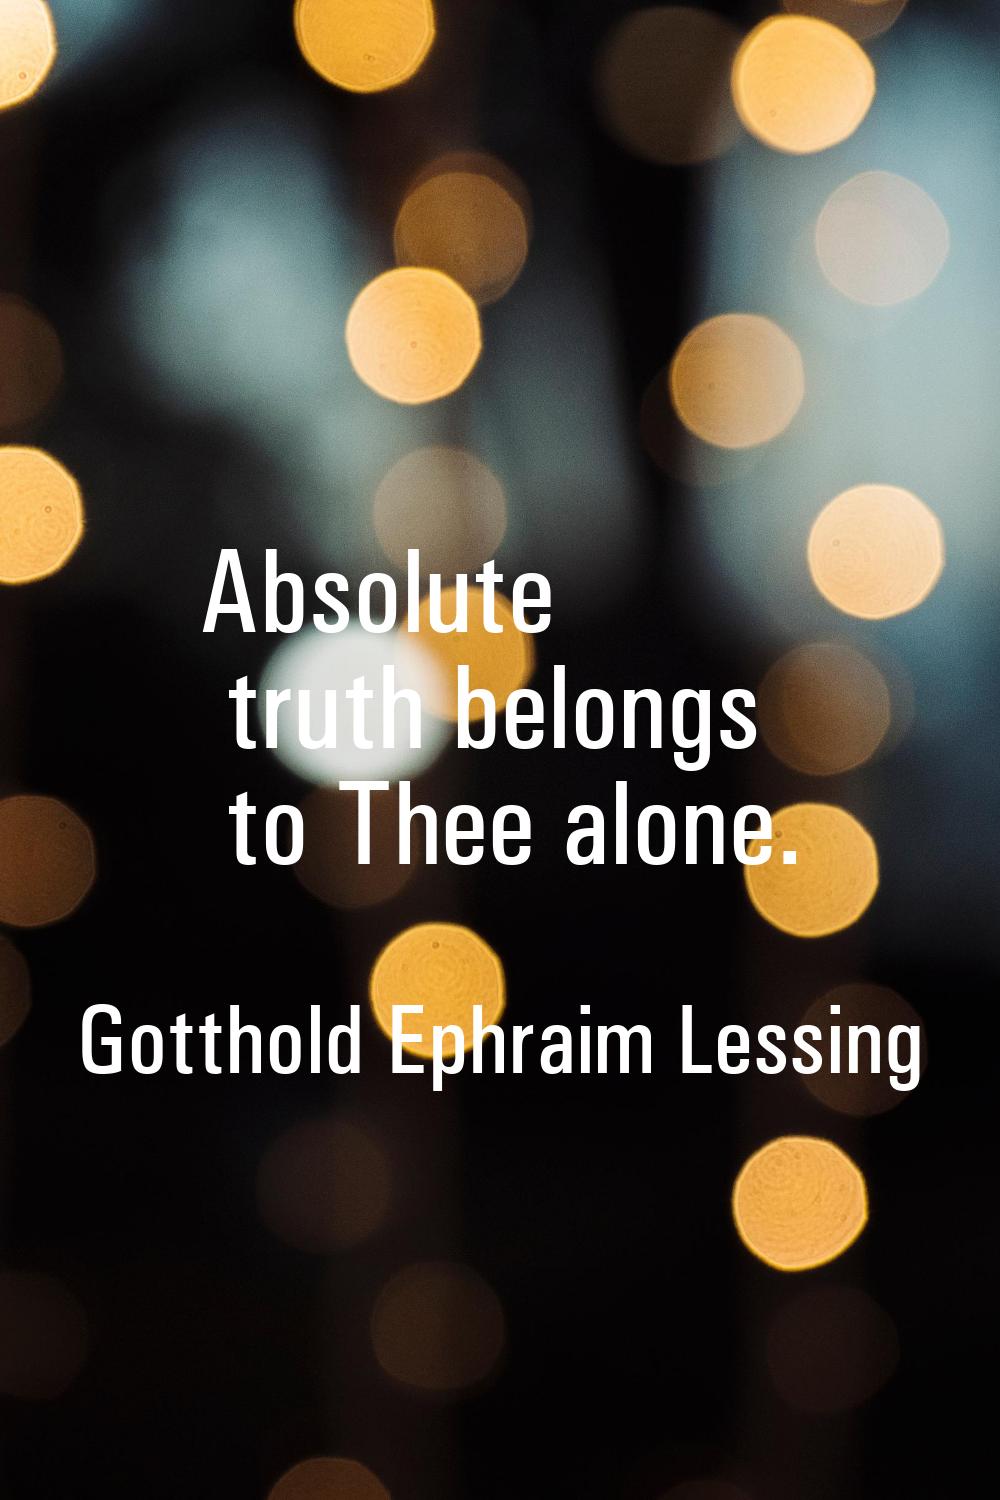 Absolute truth belongs to Thee alone.